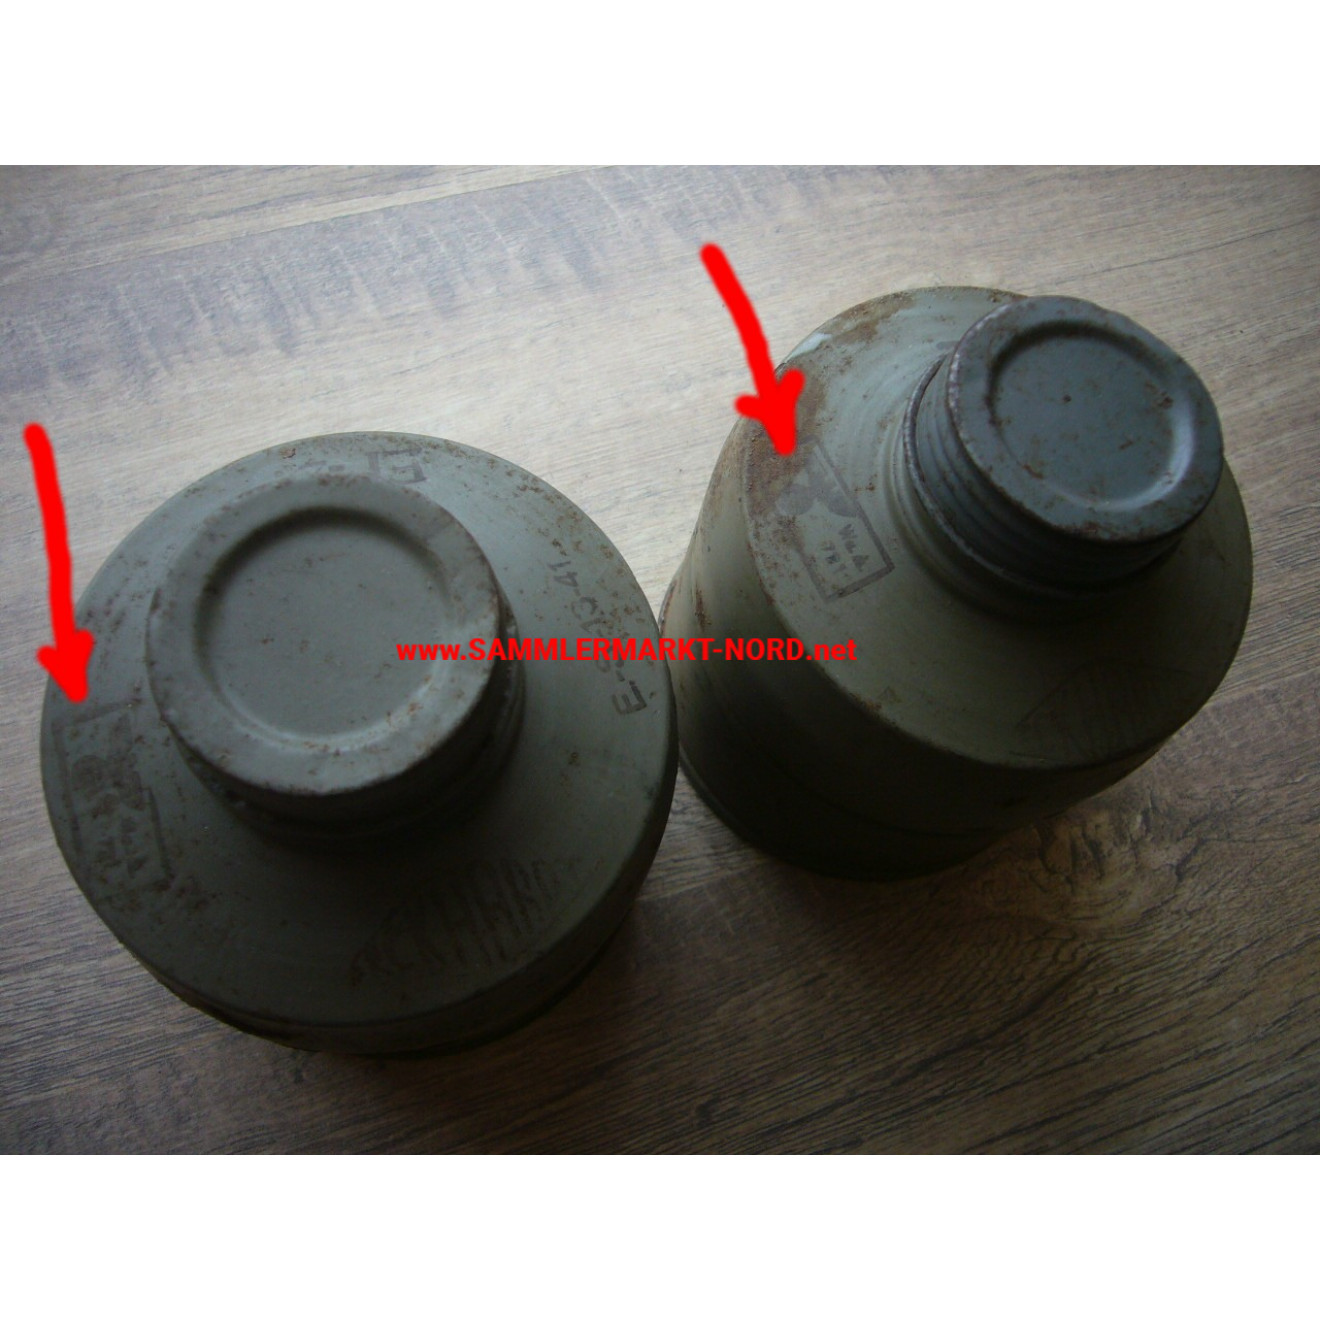 Czech gas mask filter (WH stamp), Eckhard, type EF-2